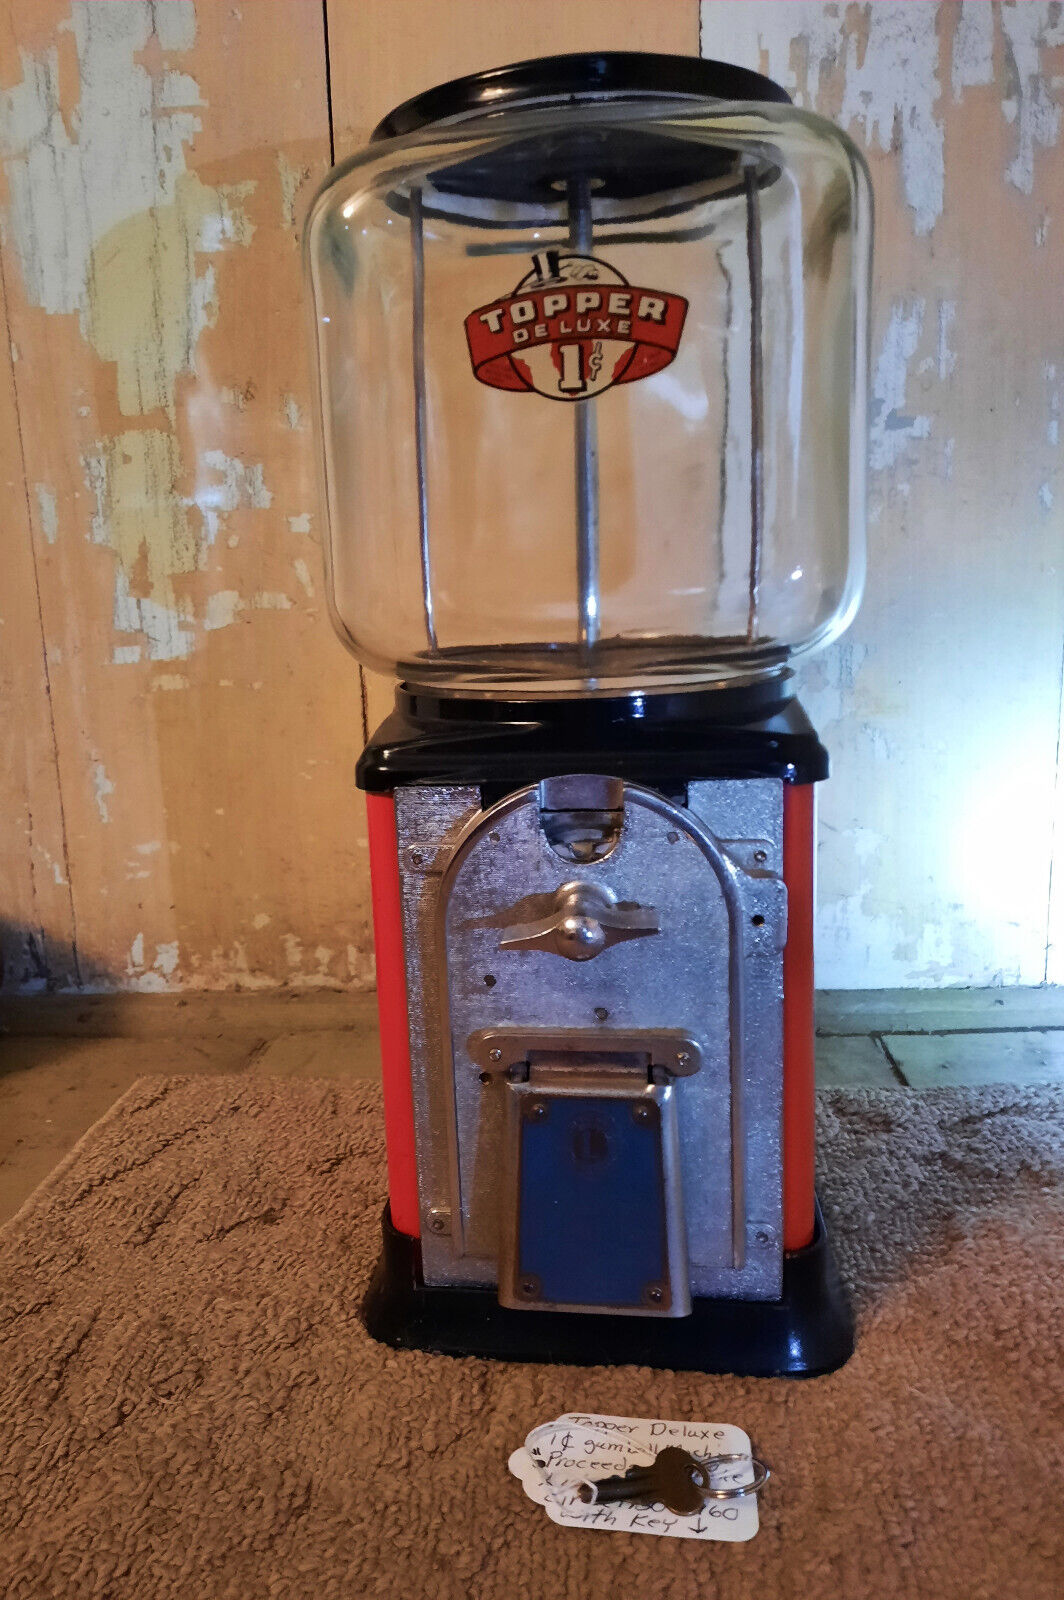 VICTOR TOPPER 1 Cent Gumball Machine With Key. Works